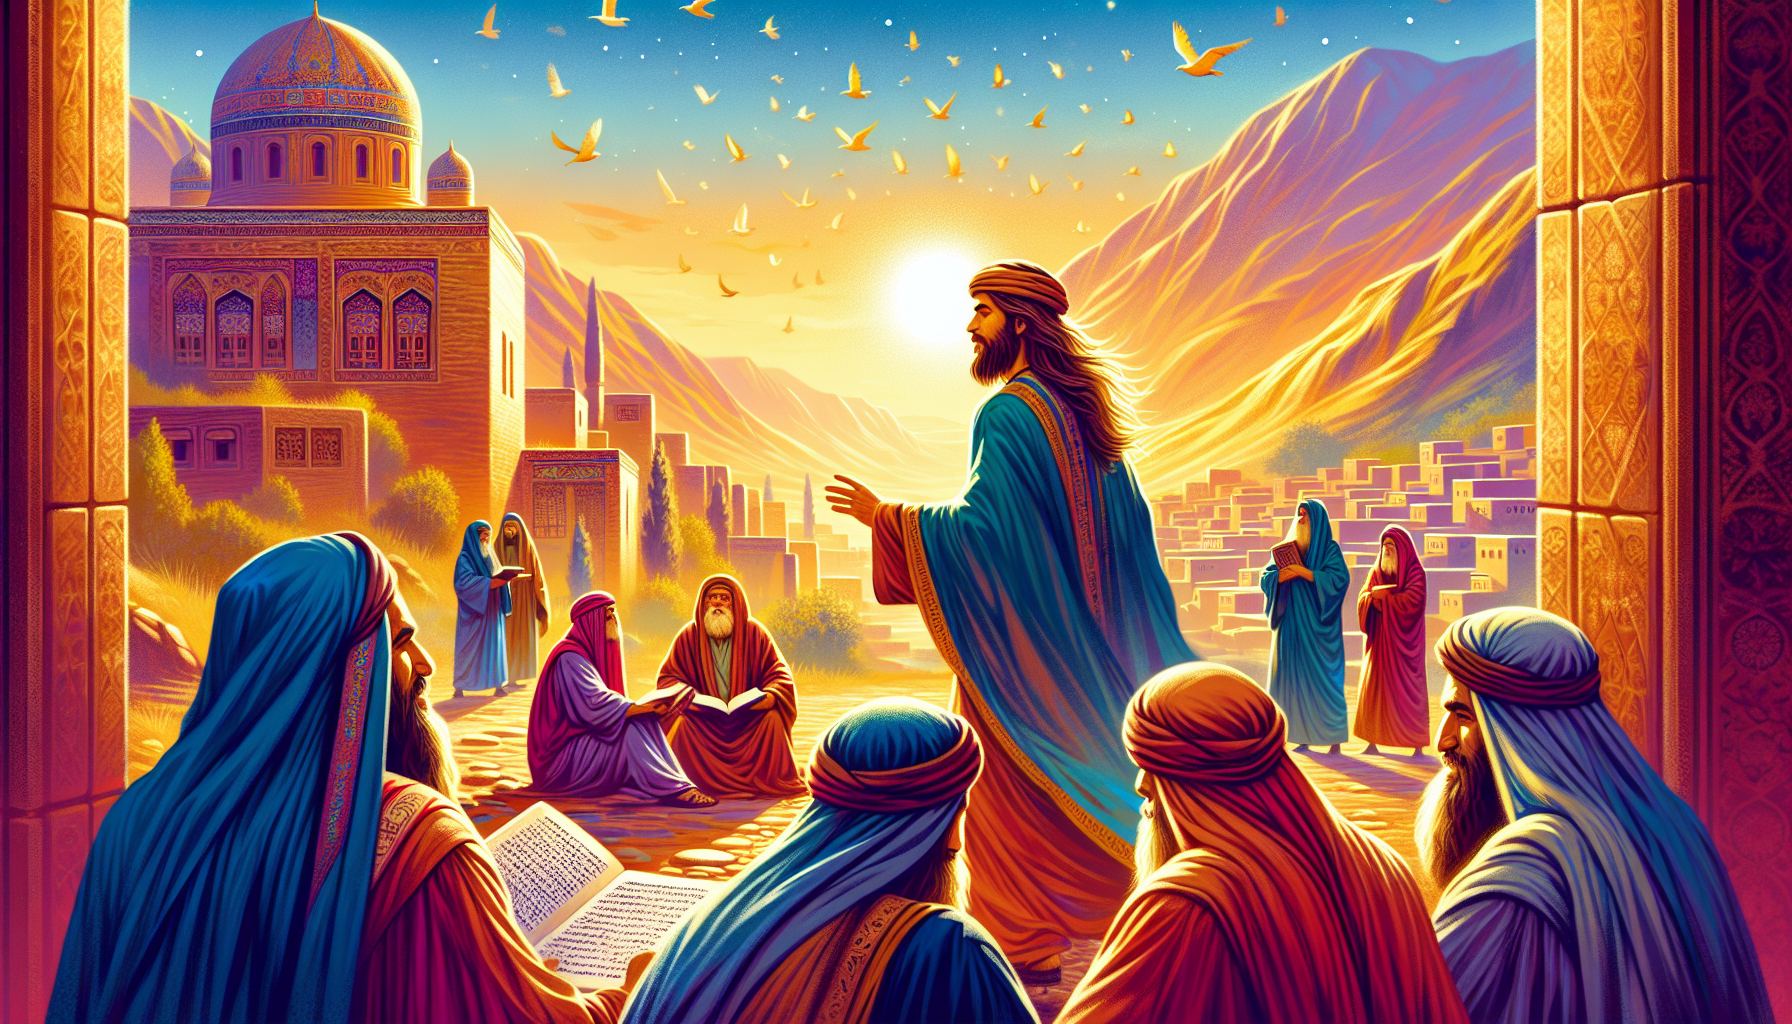 Serene landscape depicting Jesus Christ walking through an ancient Judean village with his disciples discussing scriptures, under a clear blue sky, in a vibrant, realistic style.